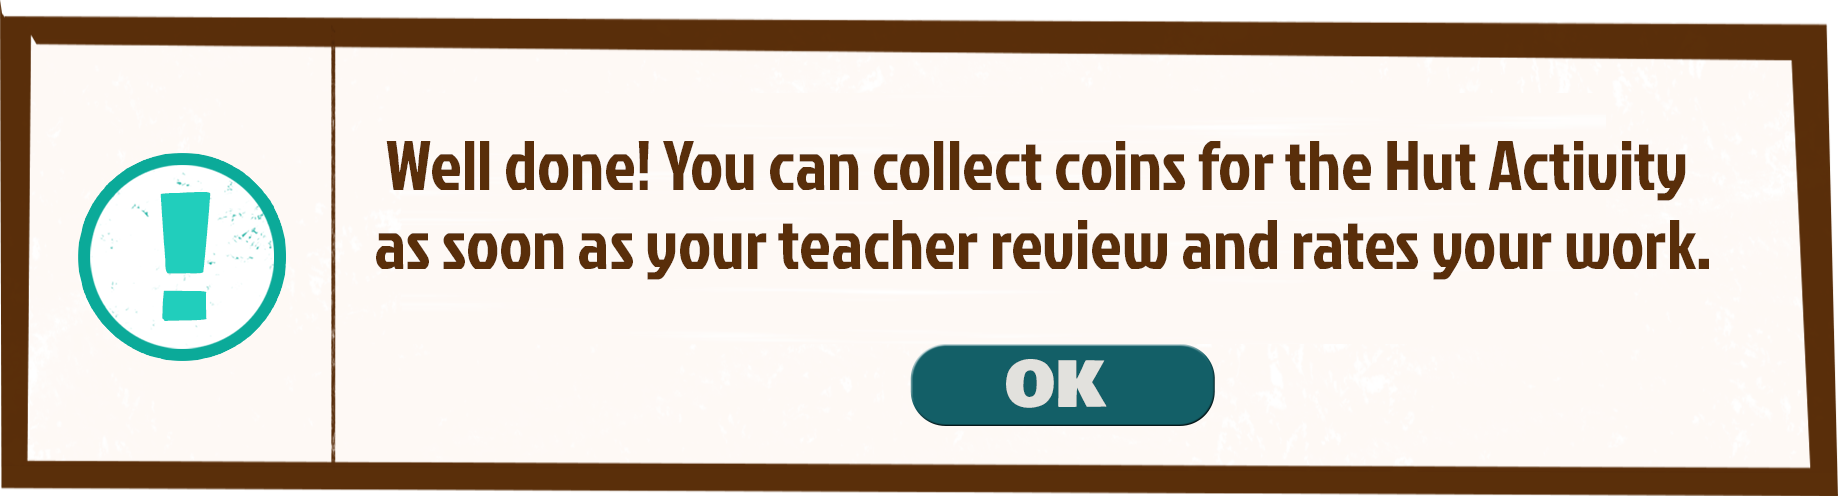 Well done! You can collect coins for the Hut Activity as soon as your teacher review and rates your work.